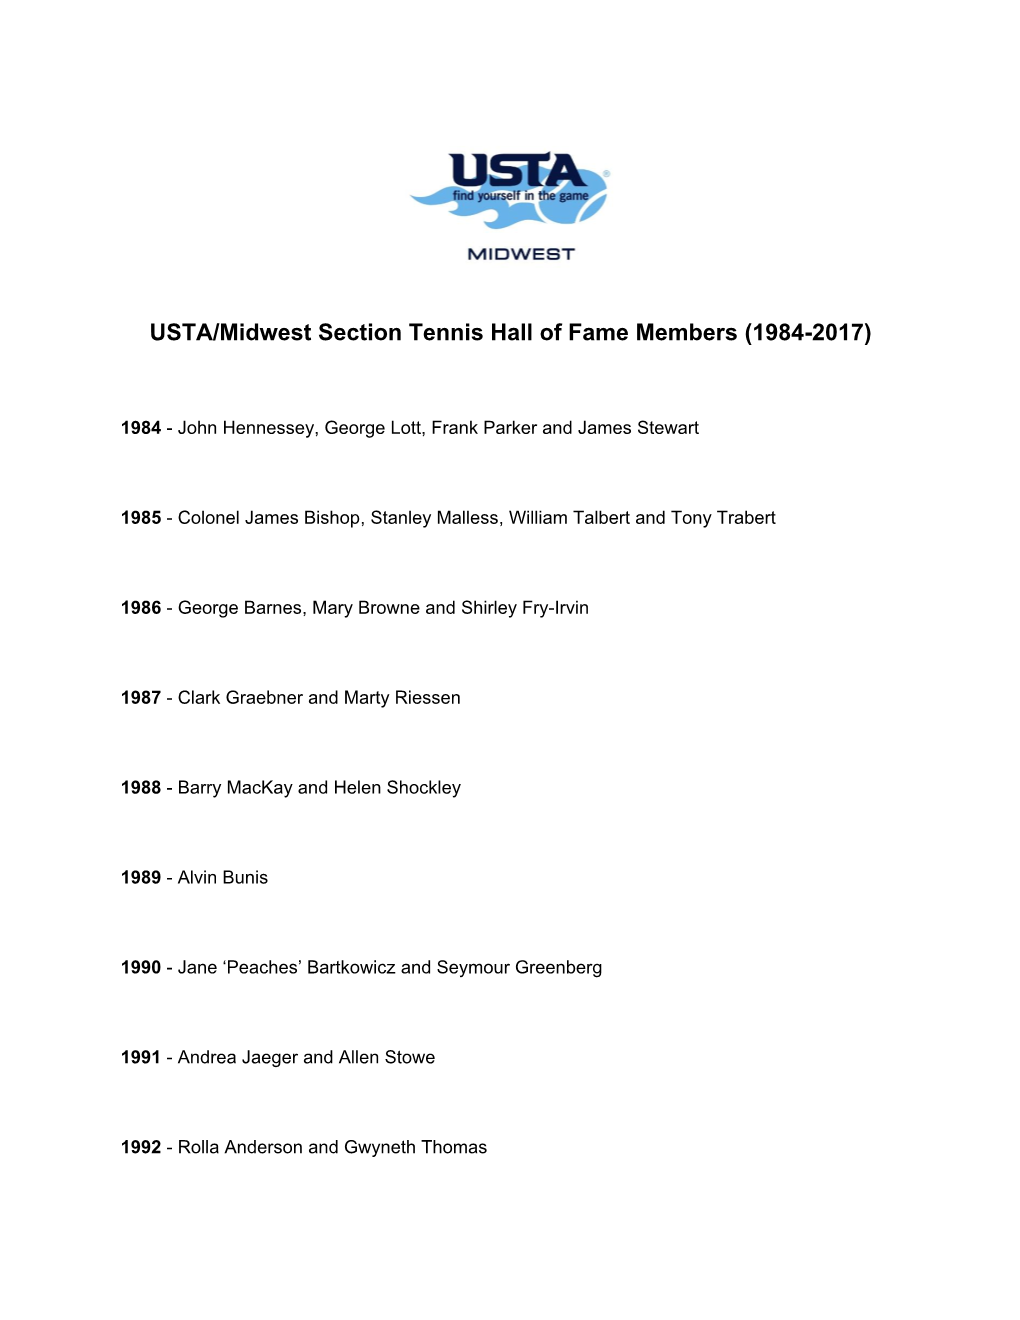 USTA/Midwest Section Tennis Hall of Fame Members (1984-2017)